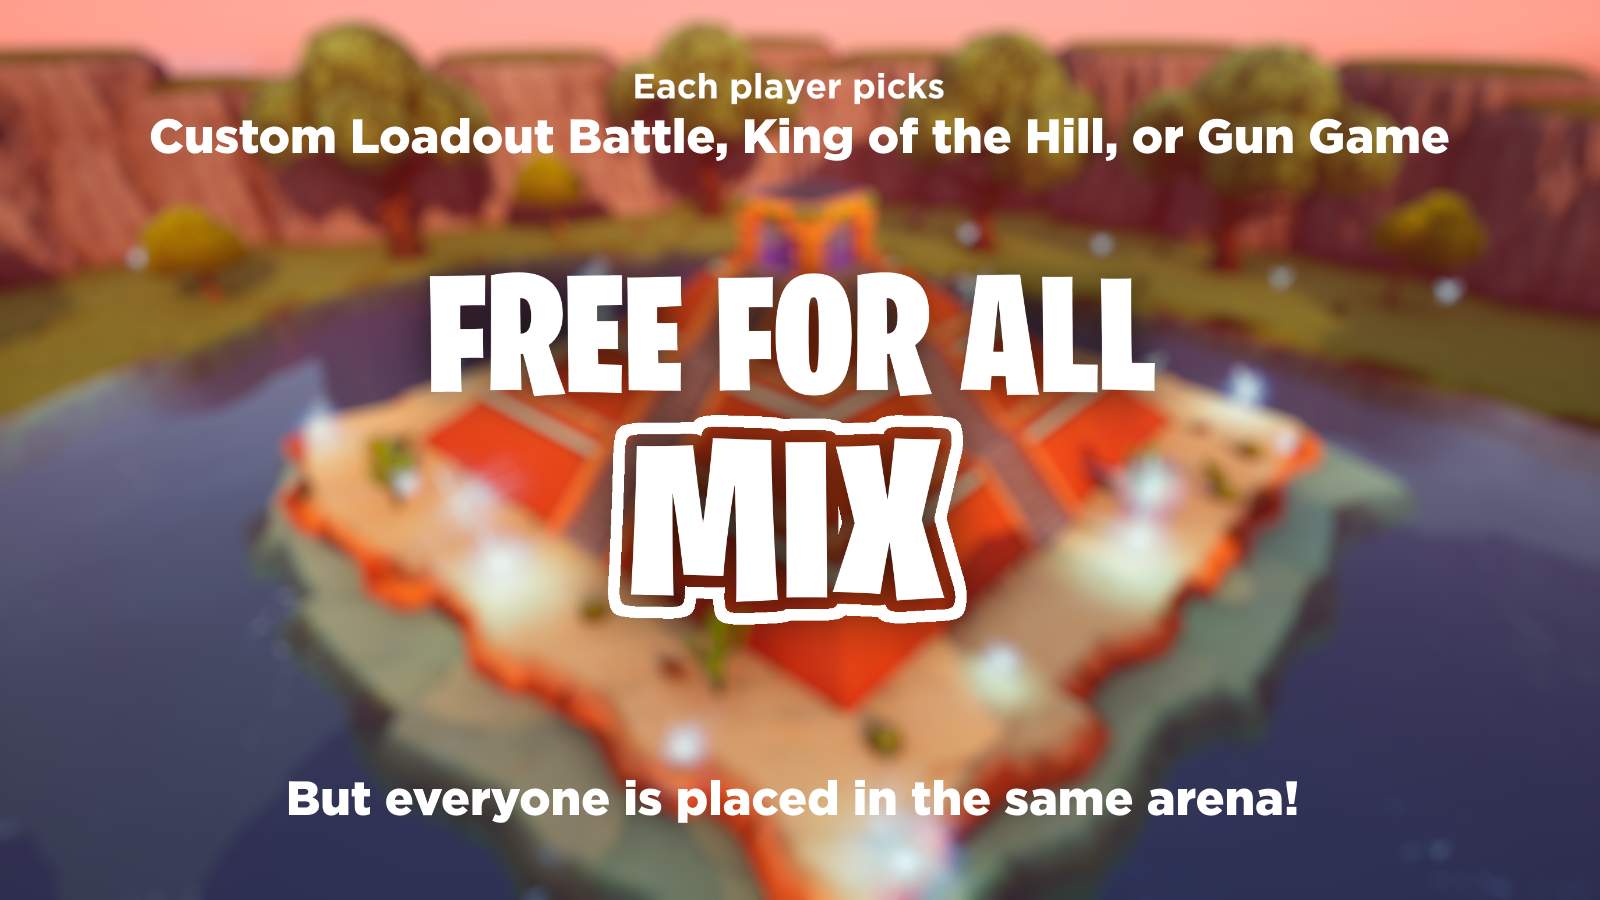 FREE FOR ALL MIX